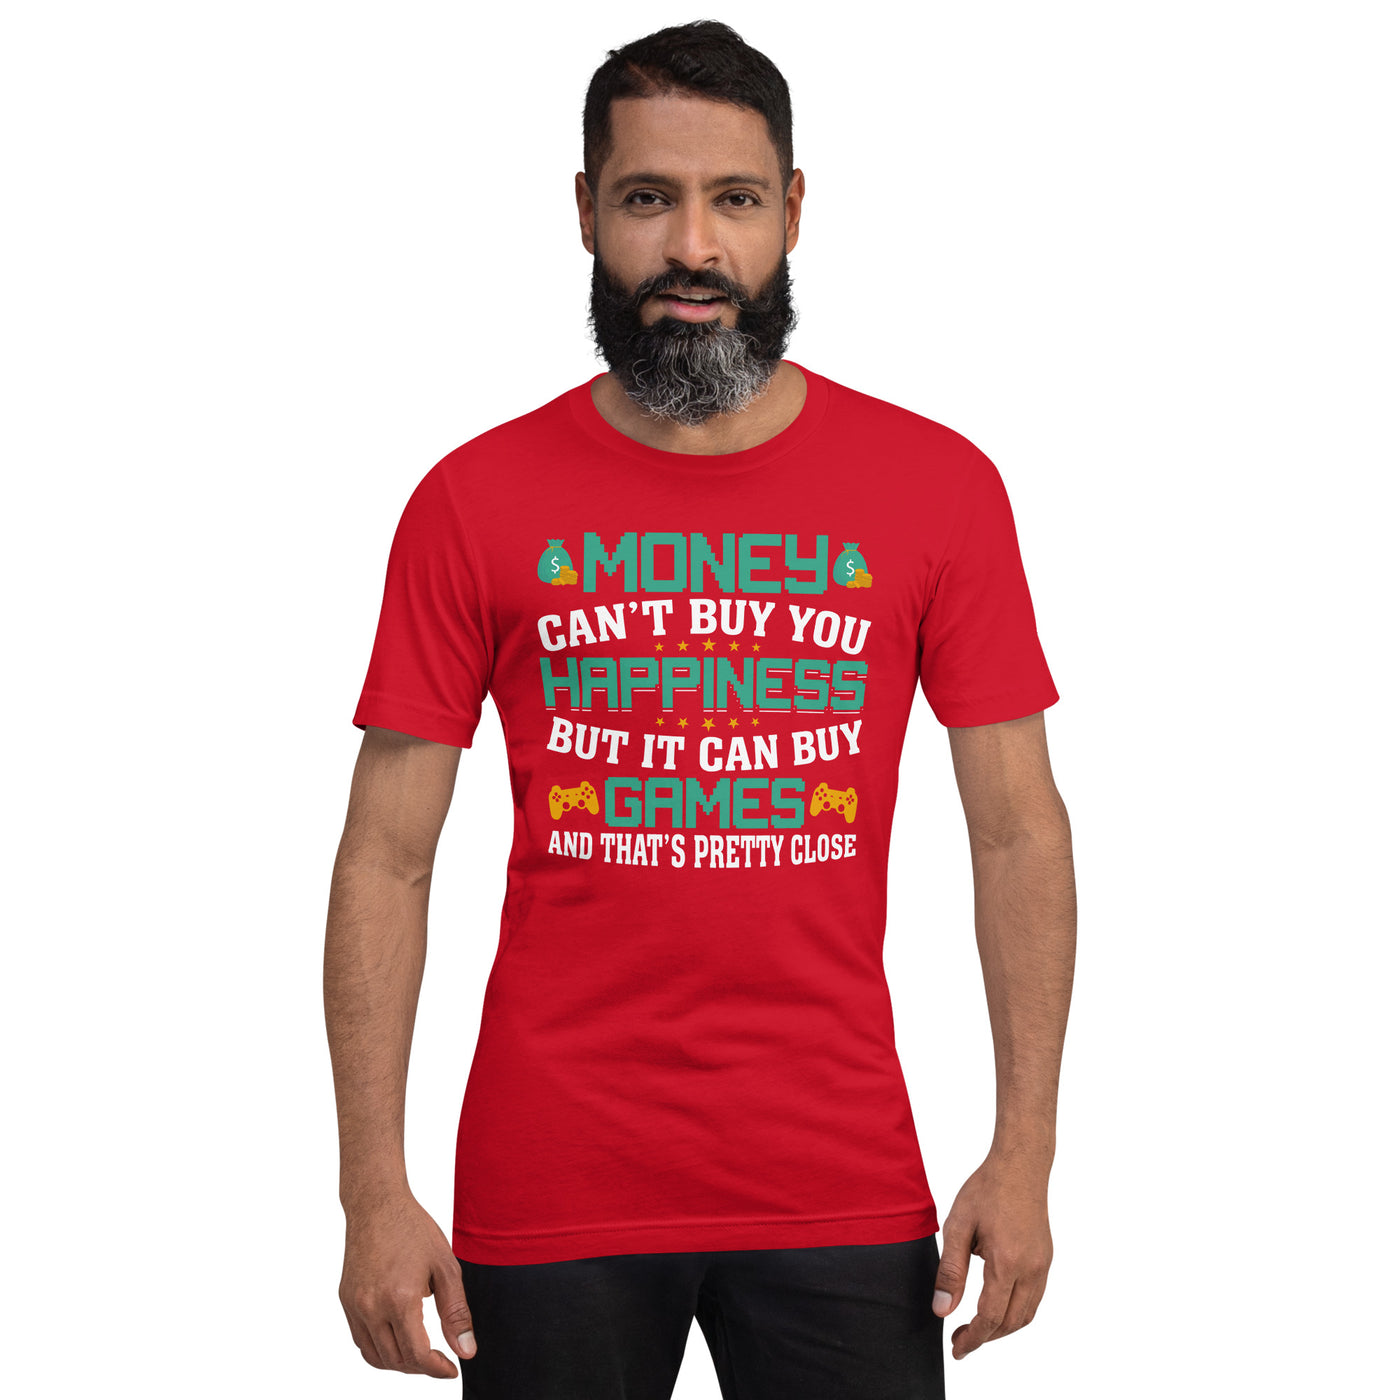 Money cannot buy you happiness, but it can buy games Unisex t-shirt